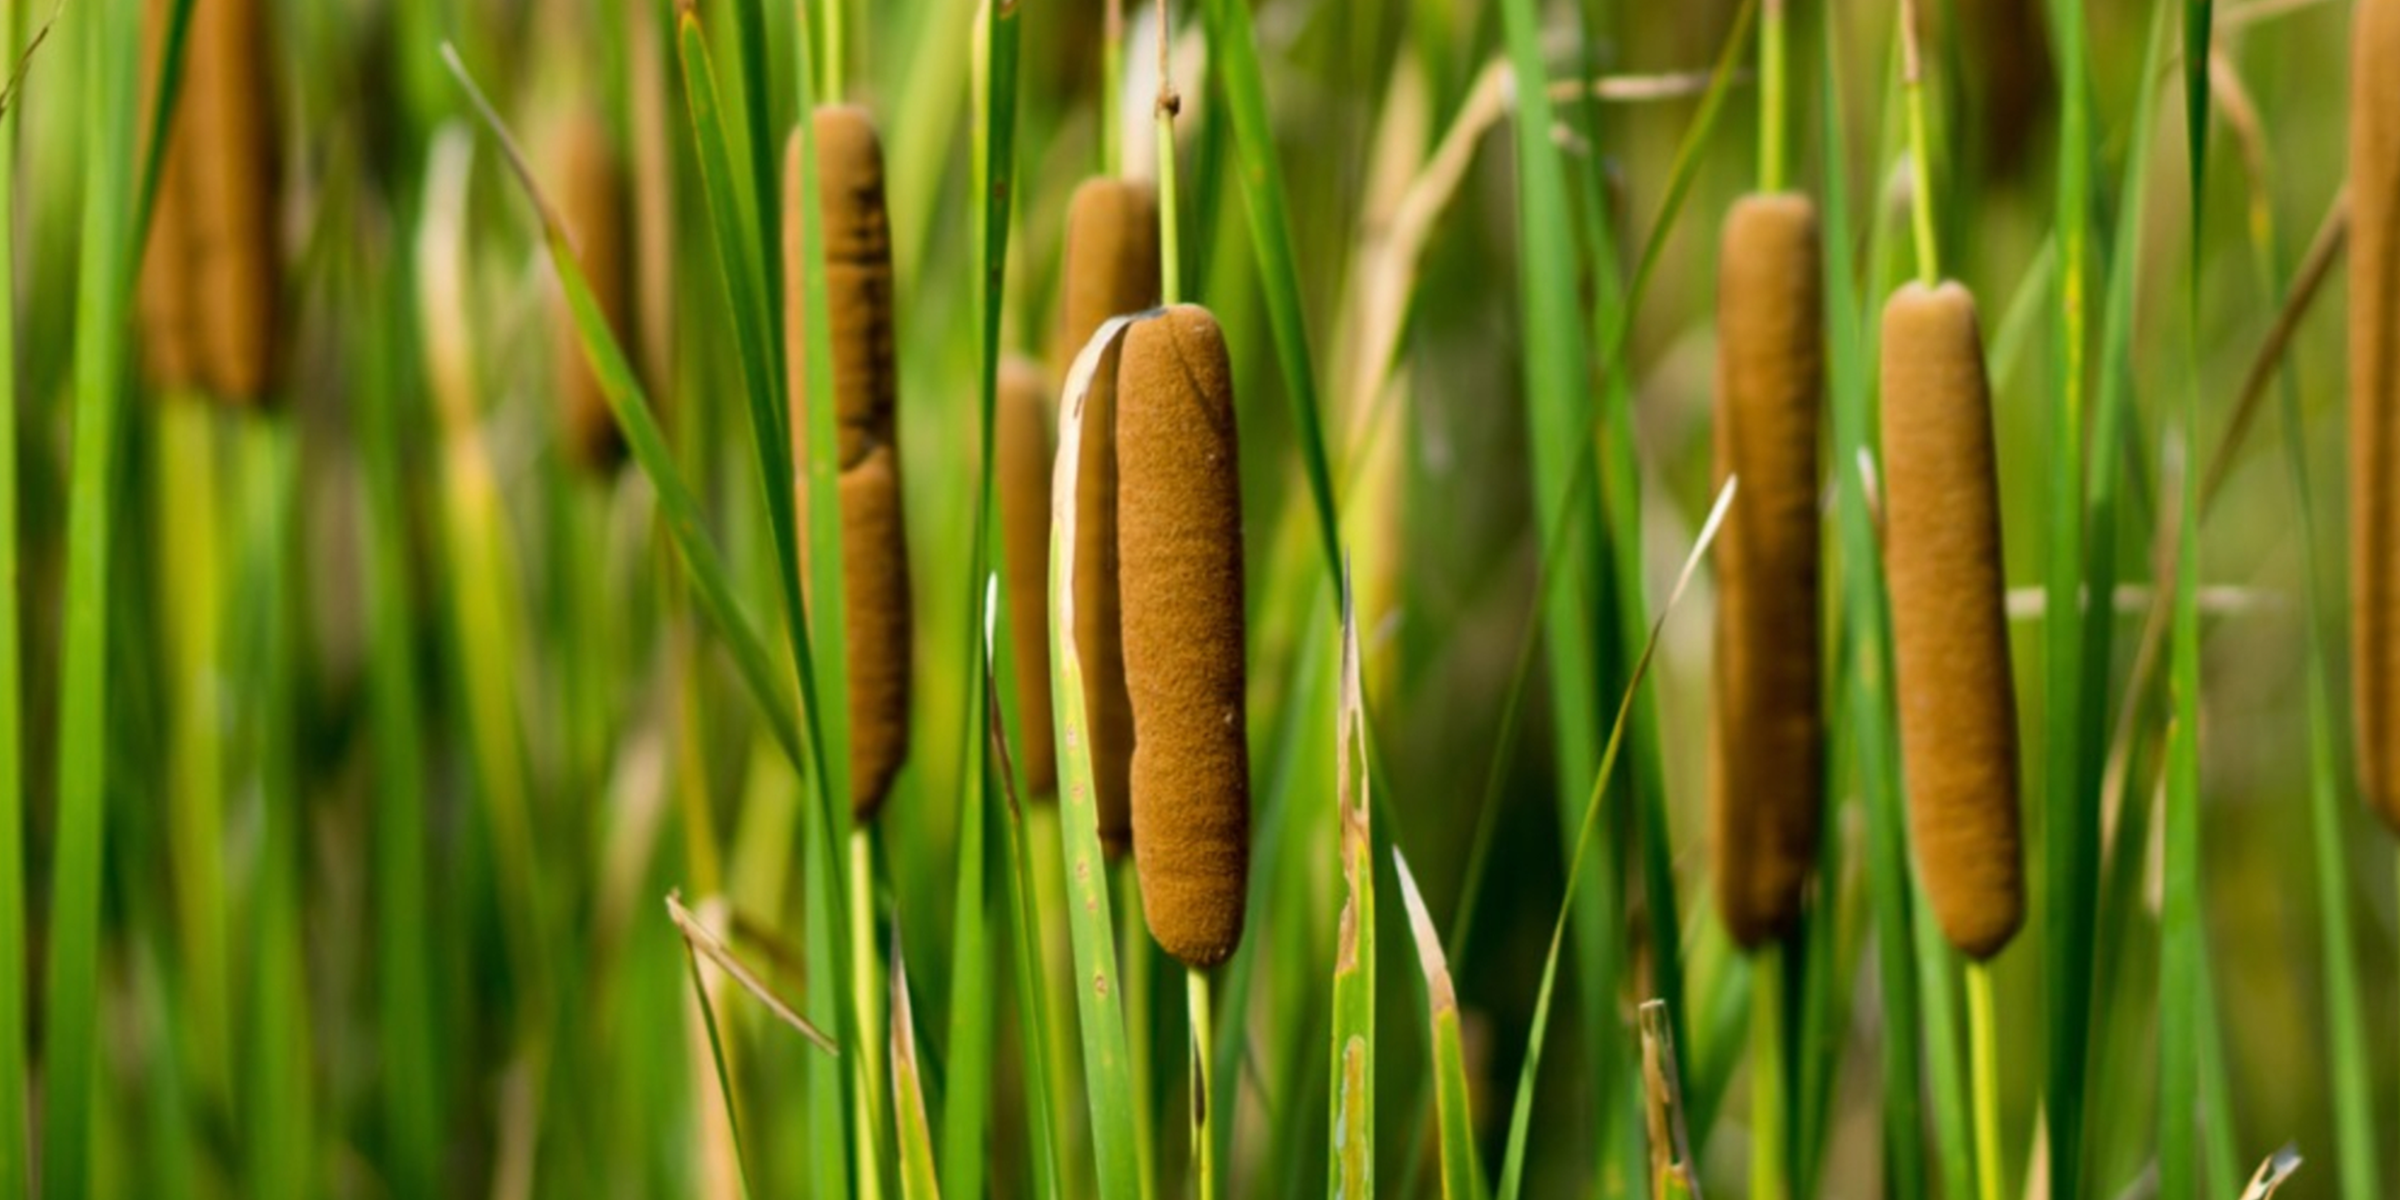 Cattail: Plants the Native Americans used for health benefits